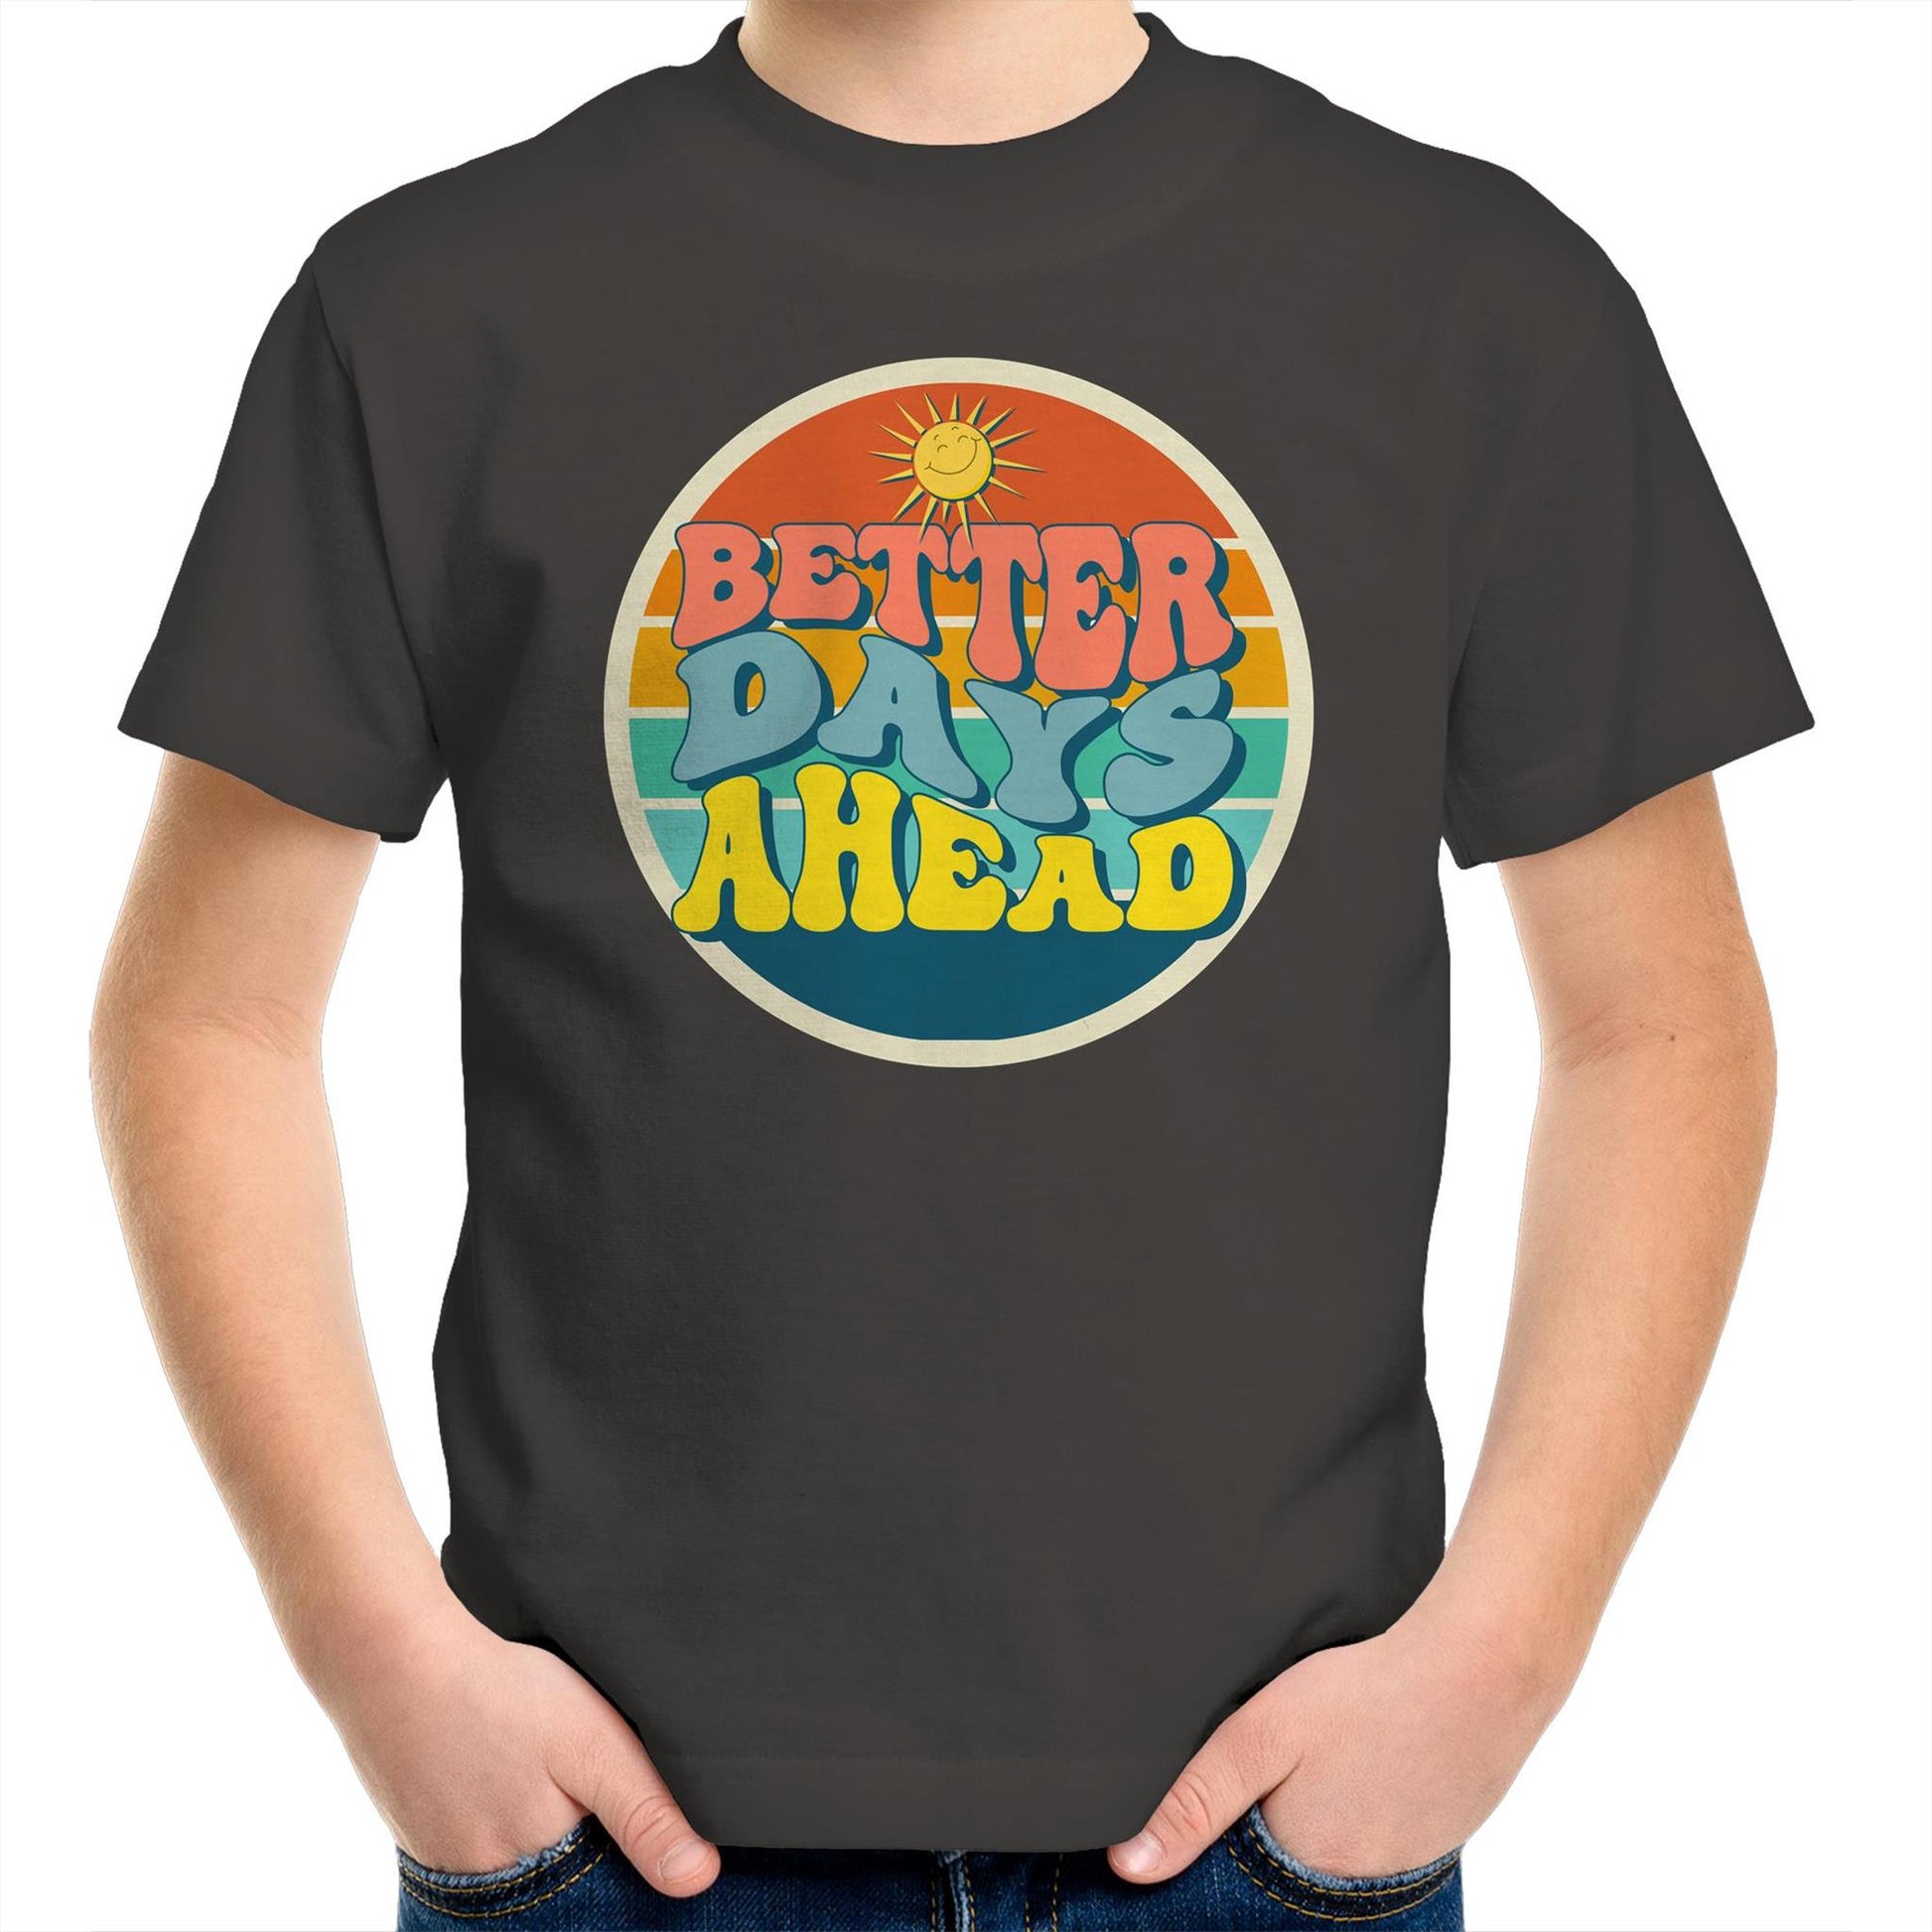 Better Days Ahead - Kids Youth T-Shirt Charcoal Kids Youth T-shirt Motivation Retro